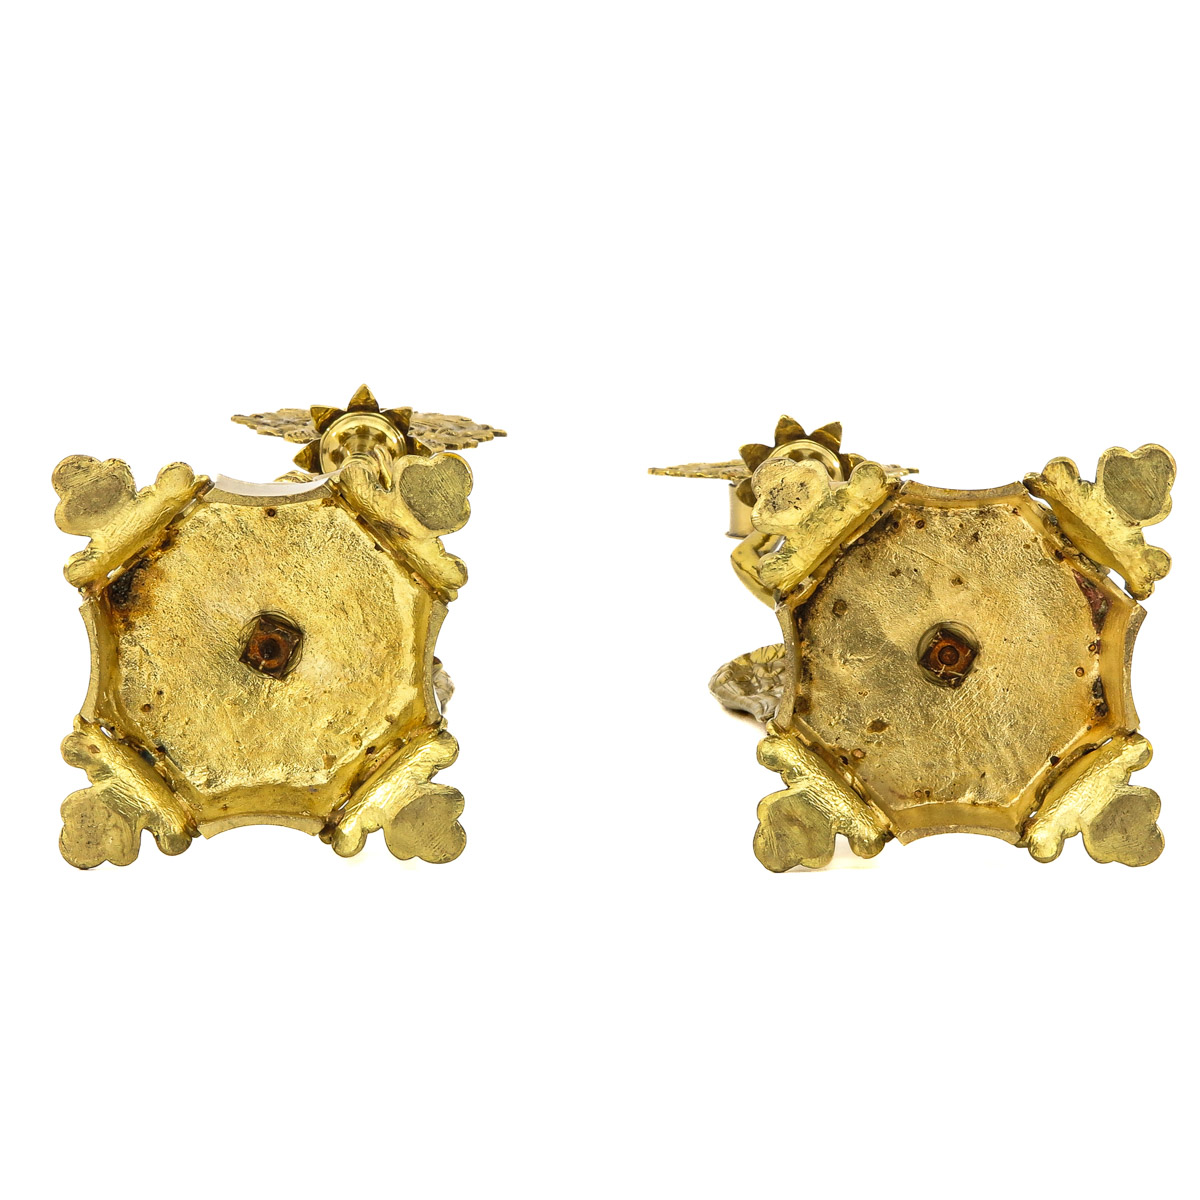 A Pair of Reliquaries - Image 6 of 10